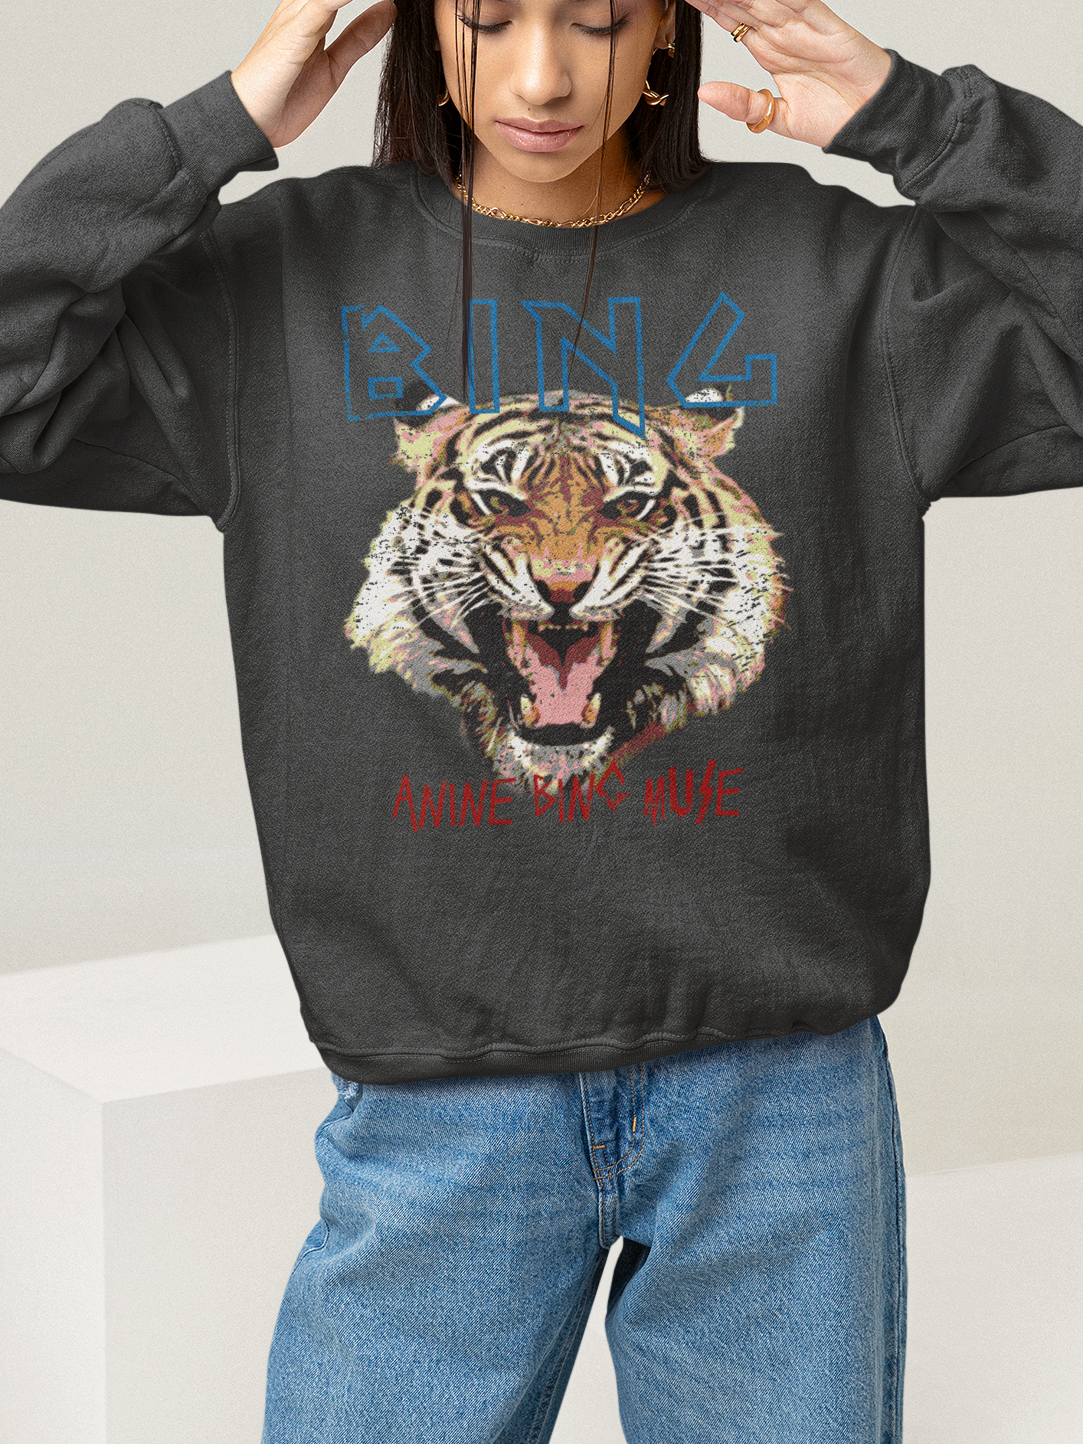 Distressed Tiger Printed Sweatshirt Out The Purse UK Charcoal